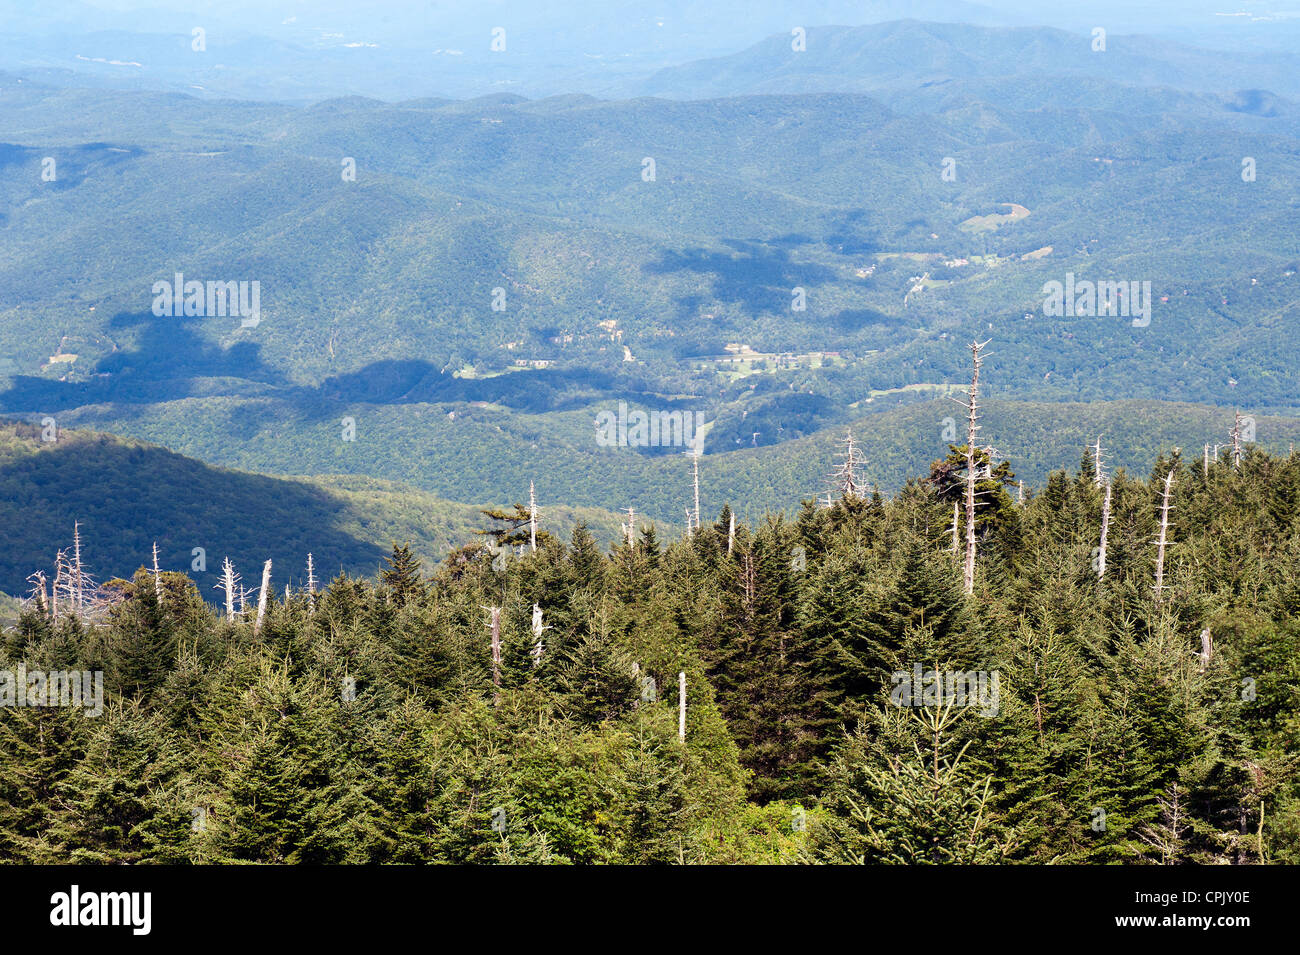 View of the Blue Ridge Mountains, North Carolina, from the top of Mount Mitchell. Part of Blue Ridge Parkway is visible. Stock Photo